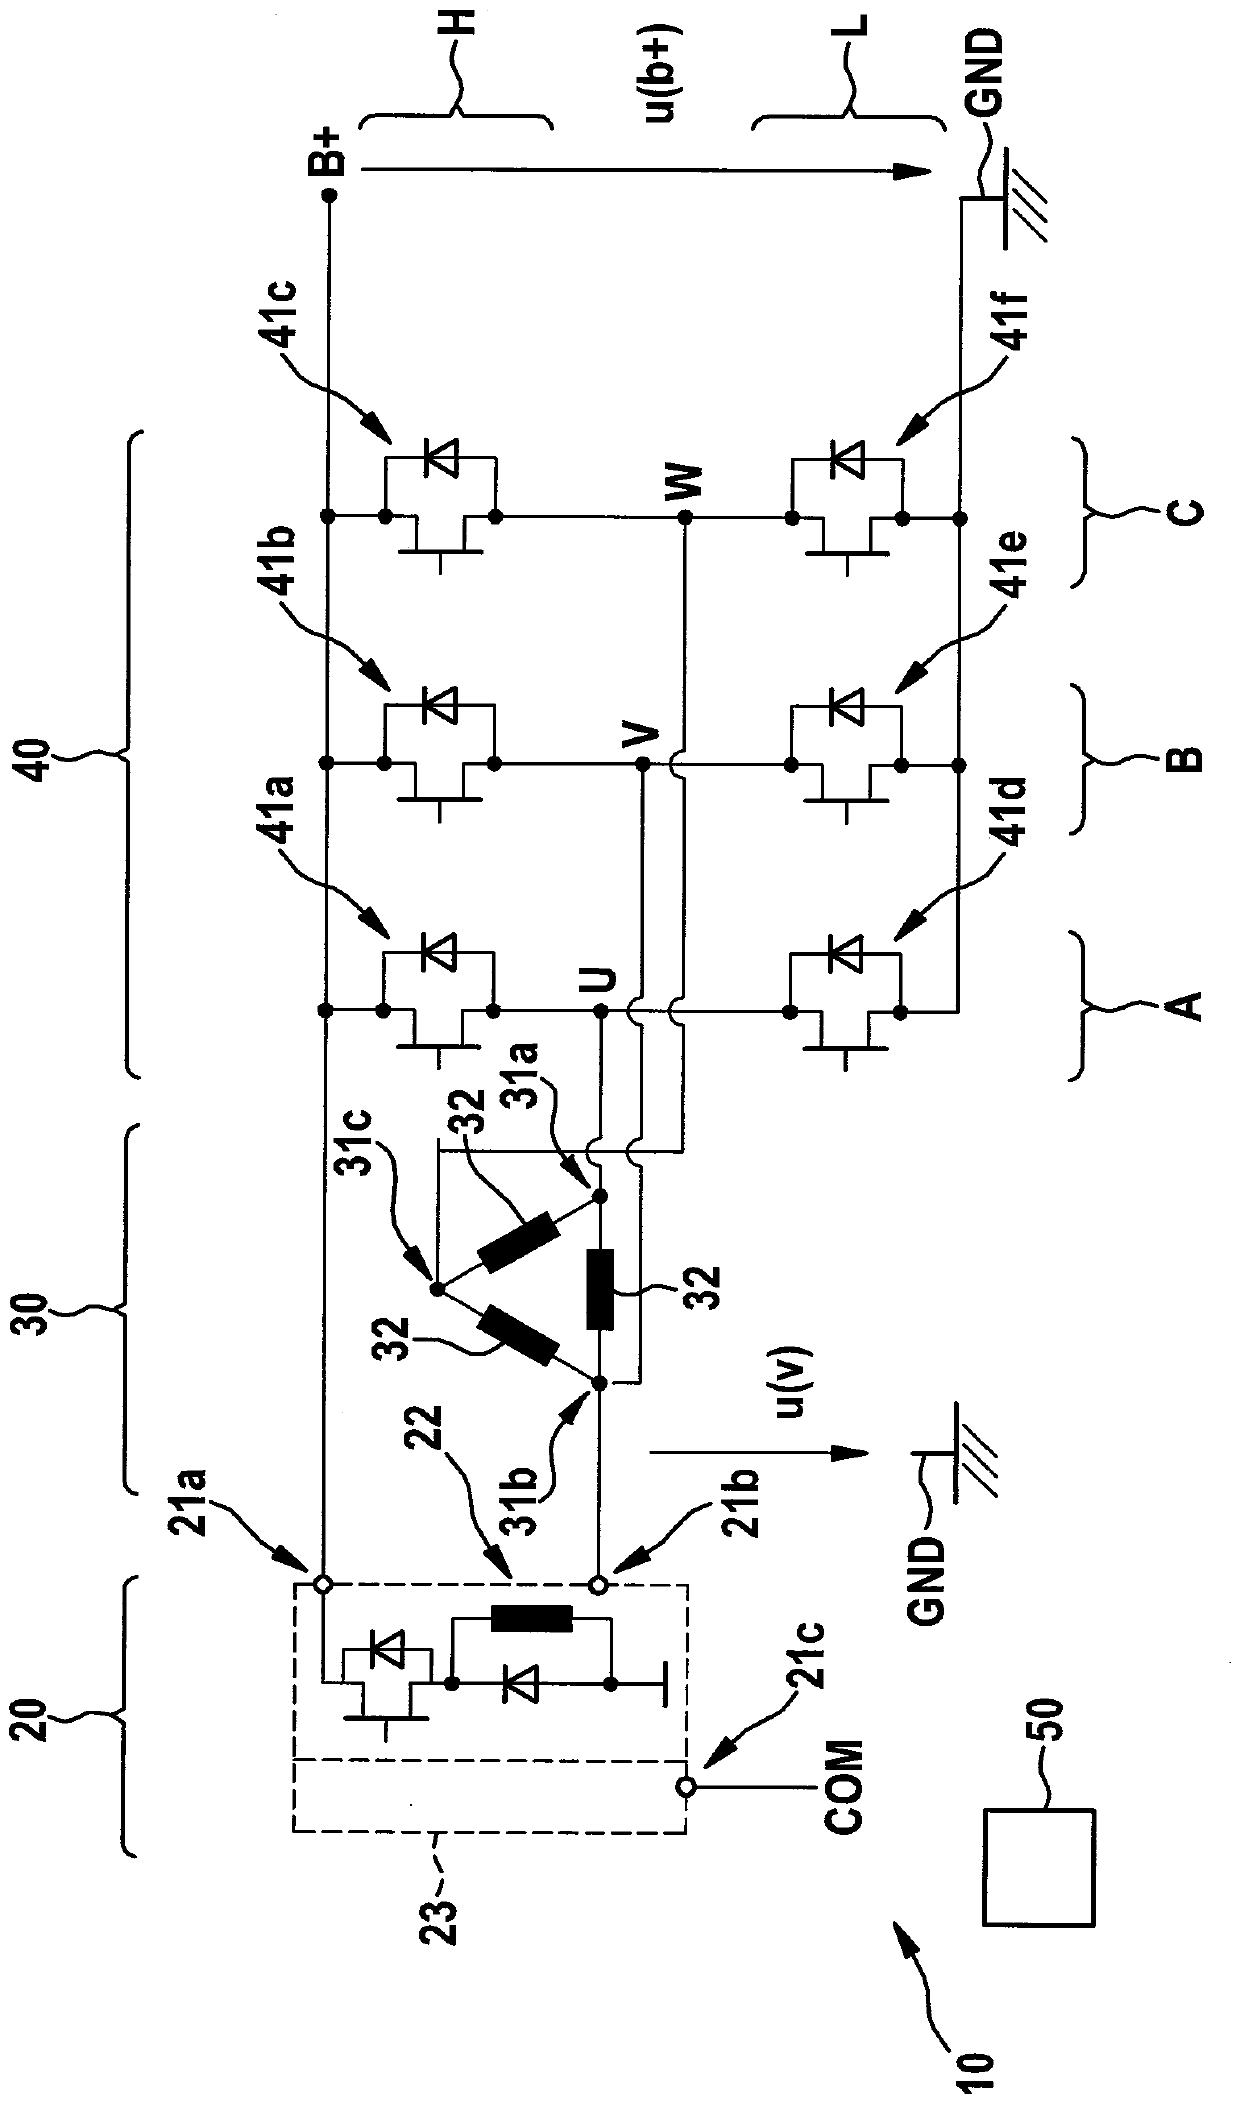 Identify defects in the function of at least one active switching element of an active bridge rectifier